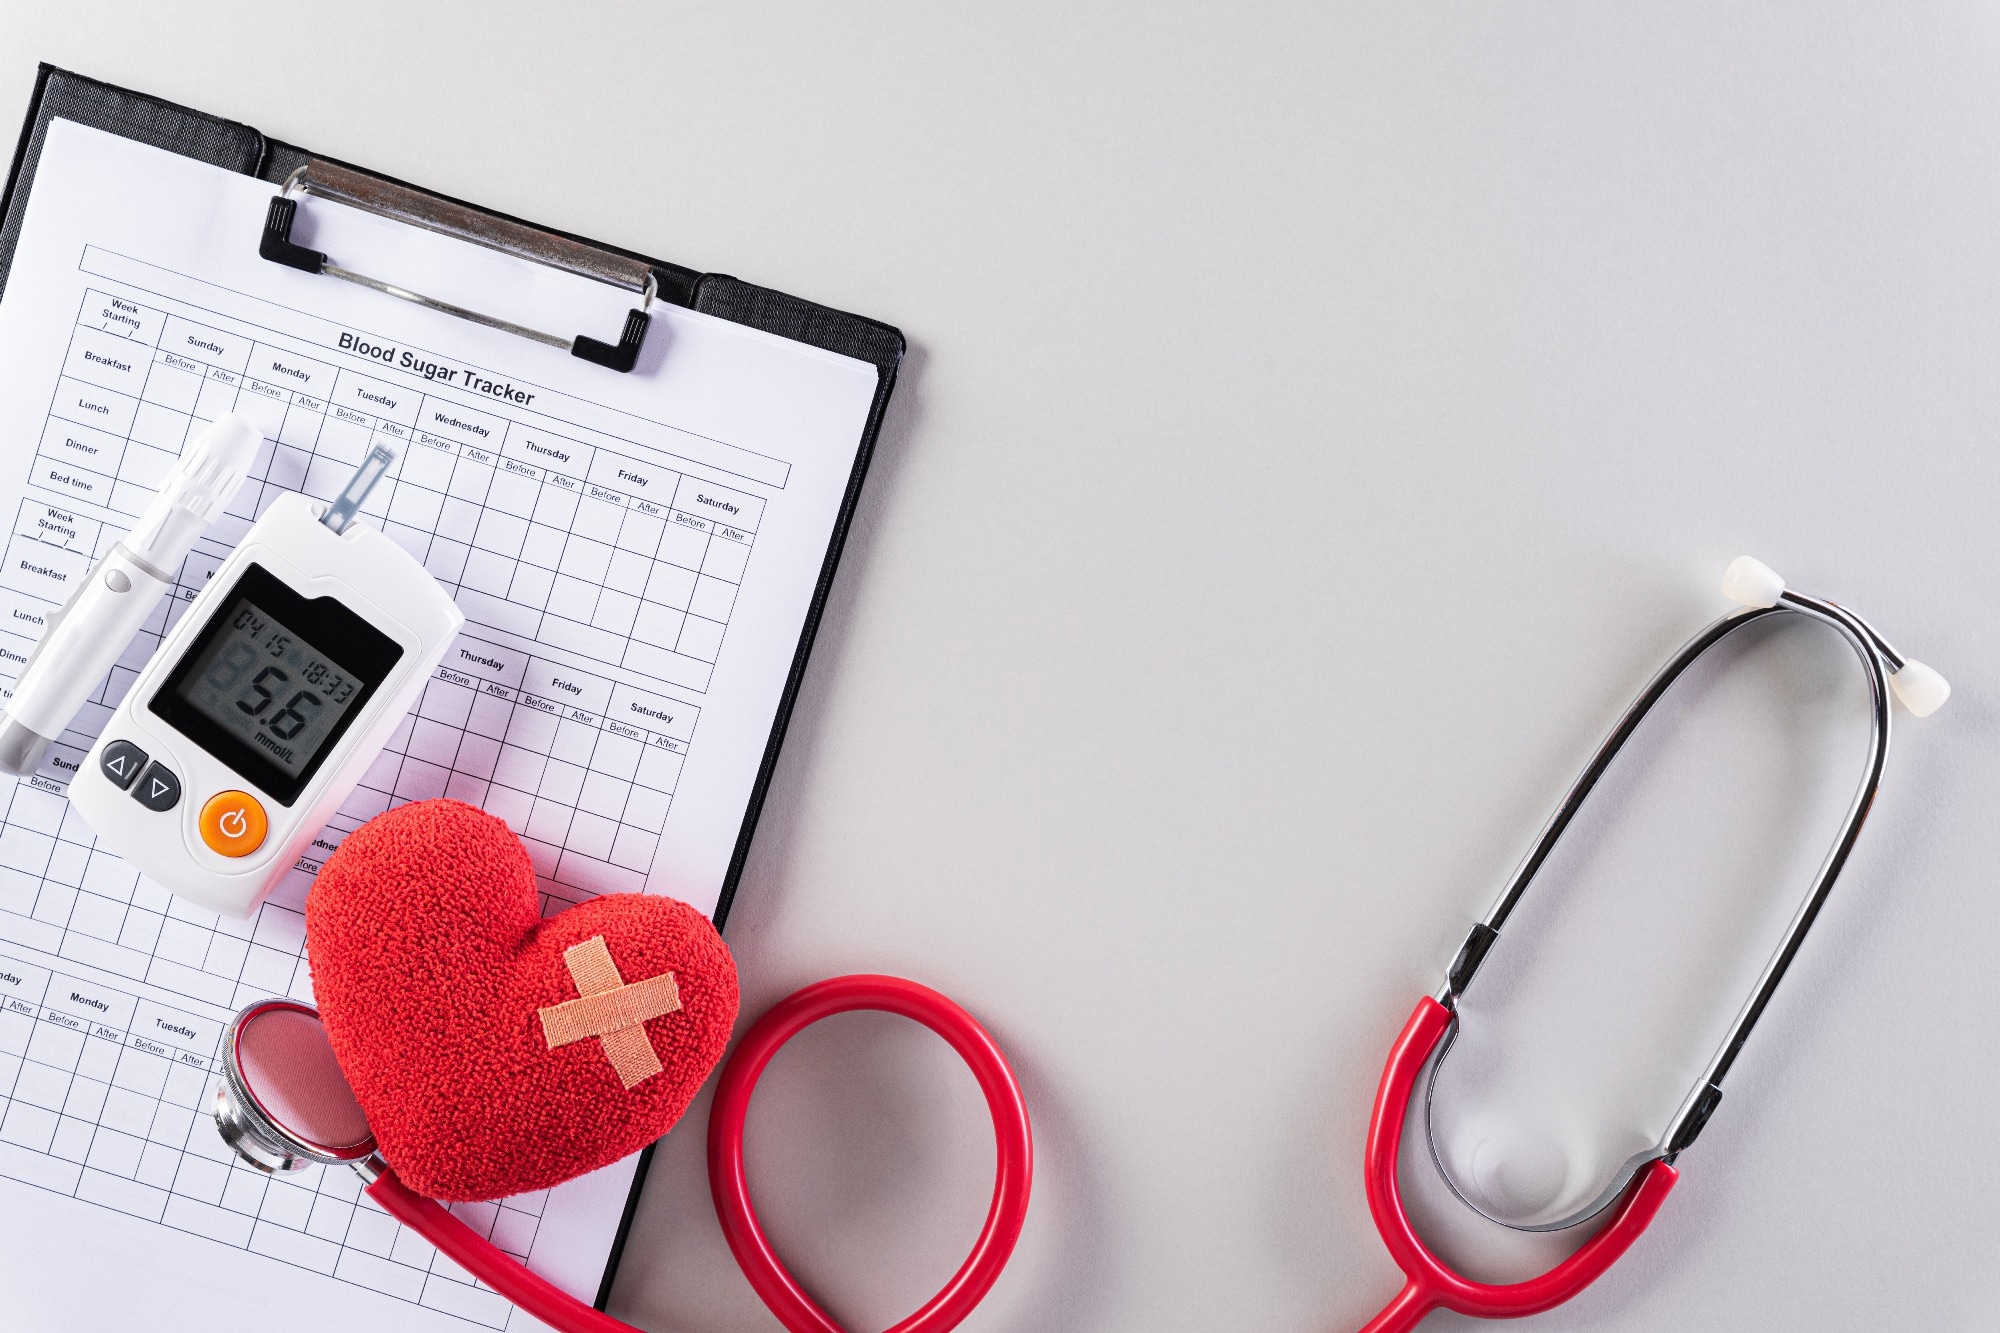 Study: Contemporary Use of Cardiovascular Risk Reduction Strategies in Type 2 Diabetes. Insights from The Diabetes Collaborative Registry. Image Credit: siam.pukkato / Shutterstock.com